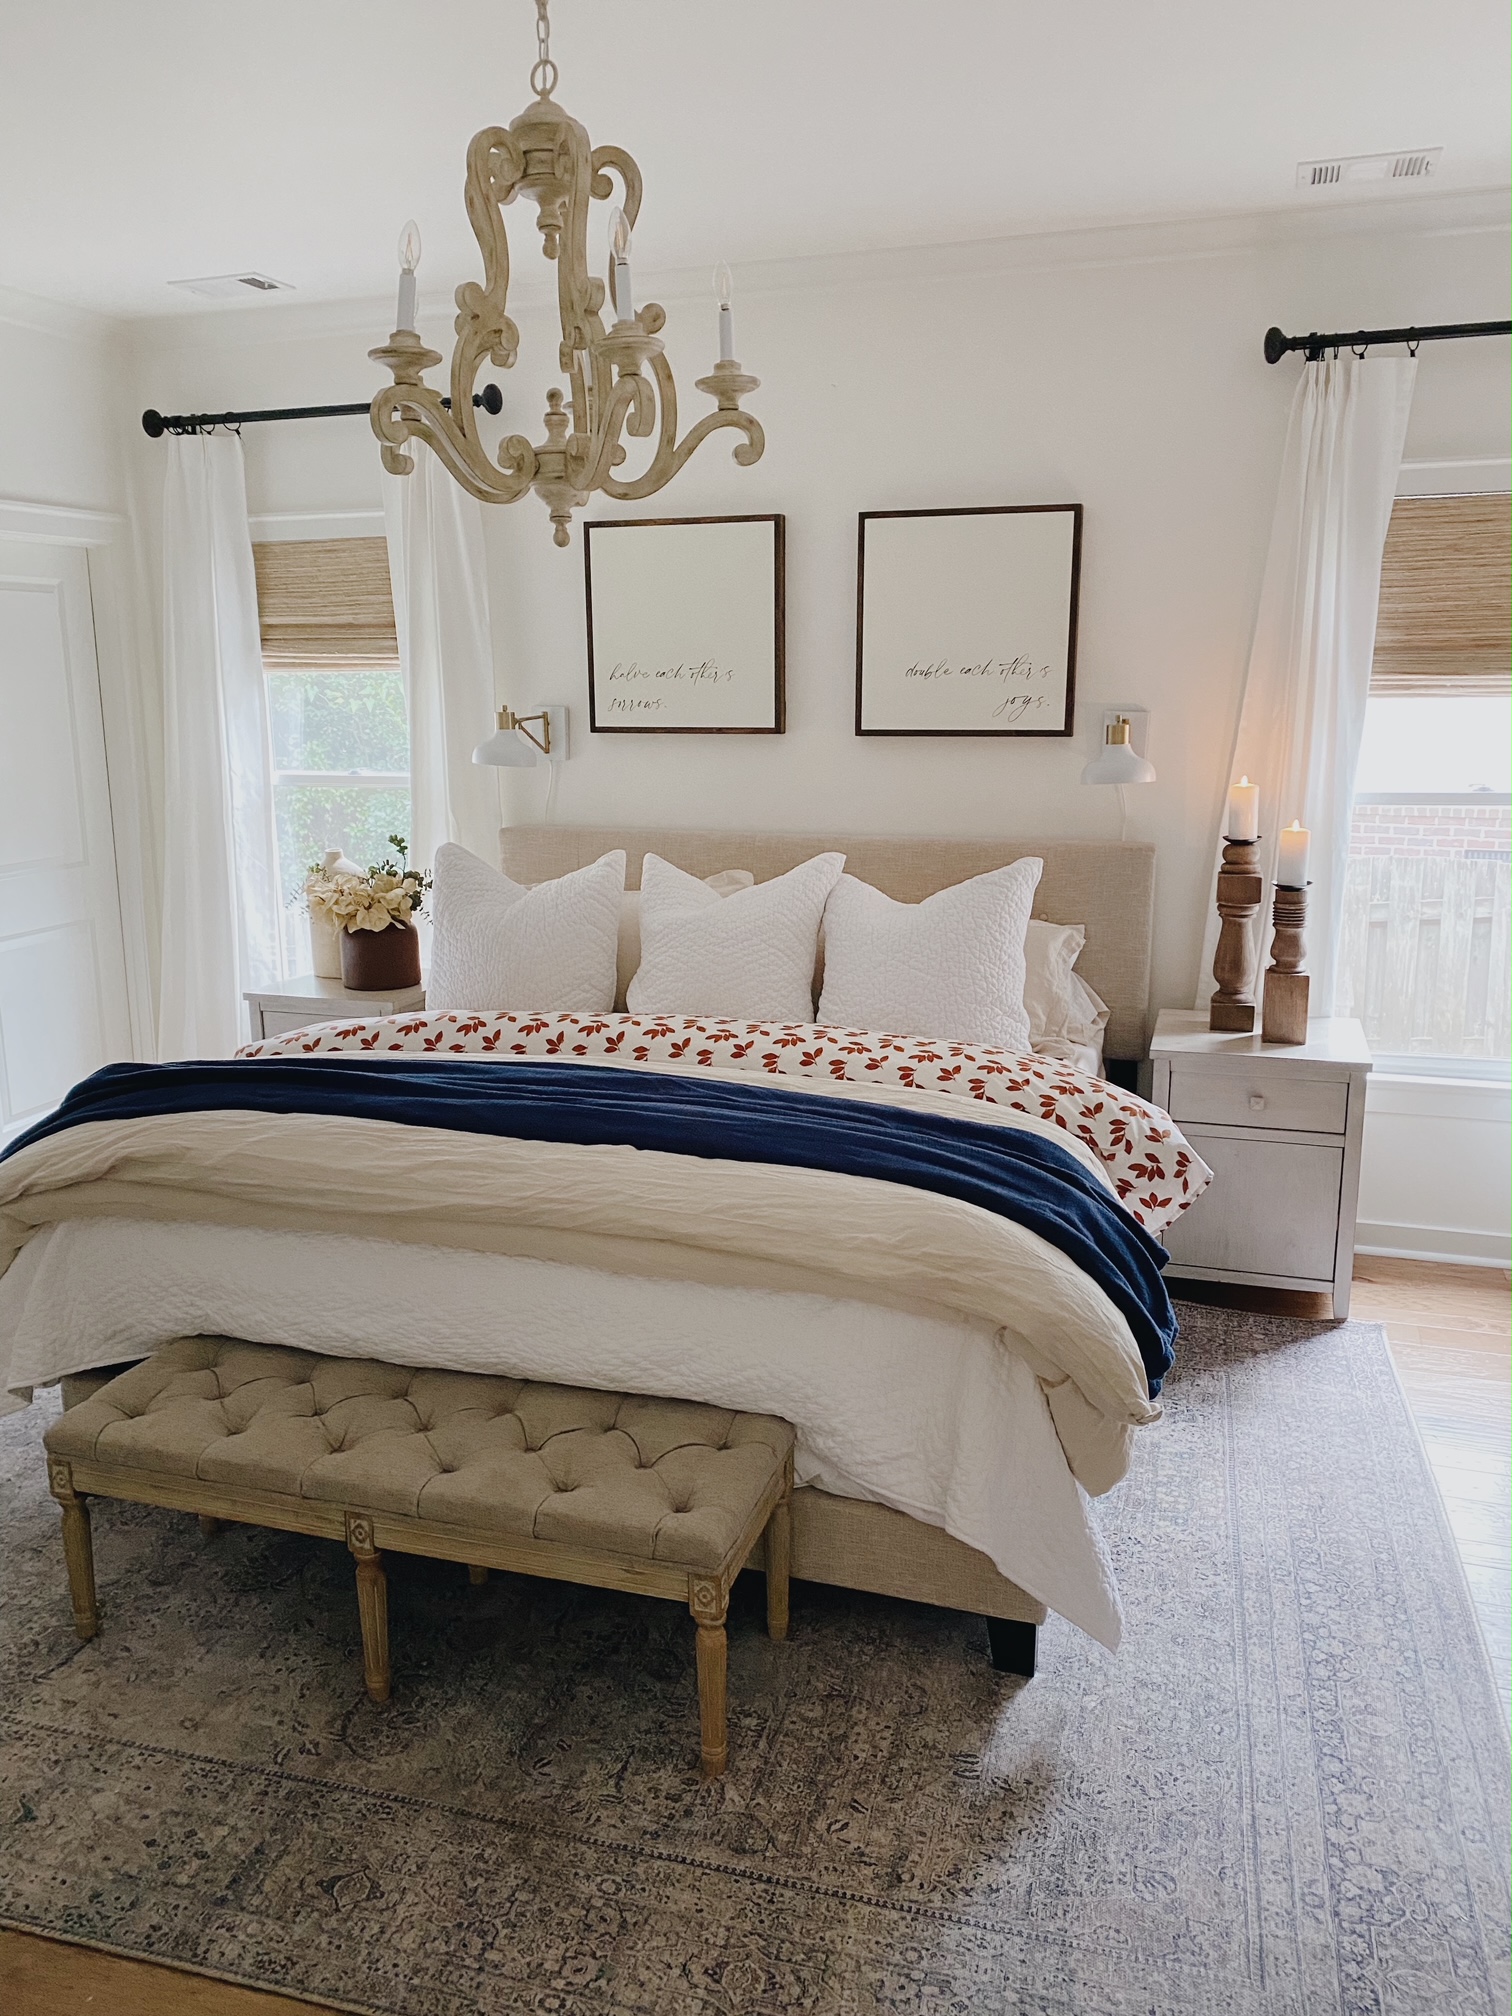 Fall Bedroom Decor Ideas featured by top AL home blogger, She Gave It A Go